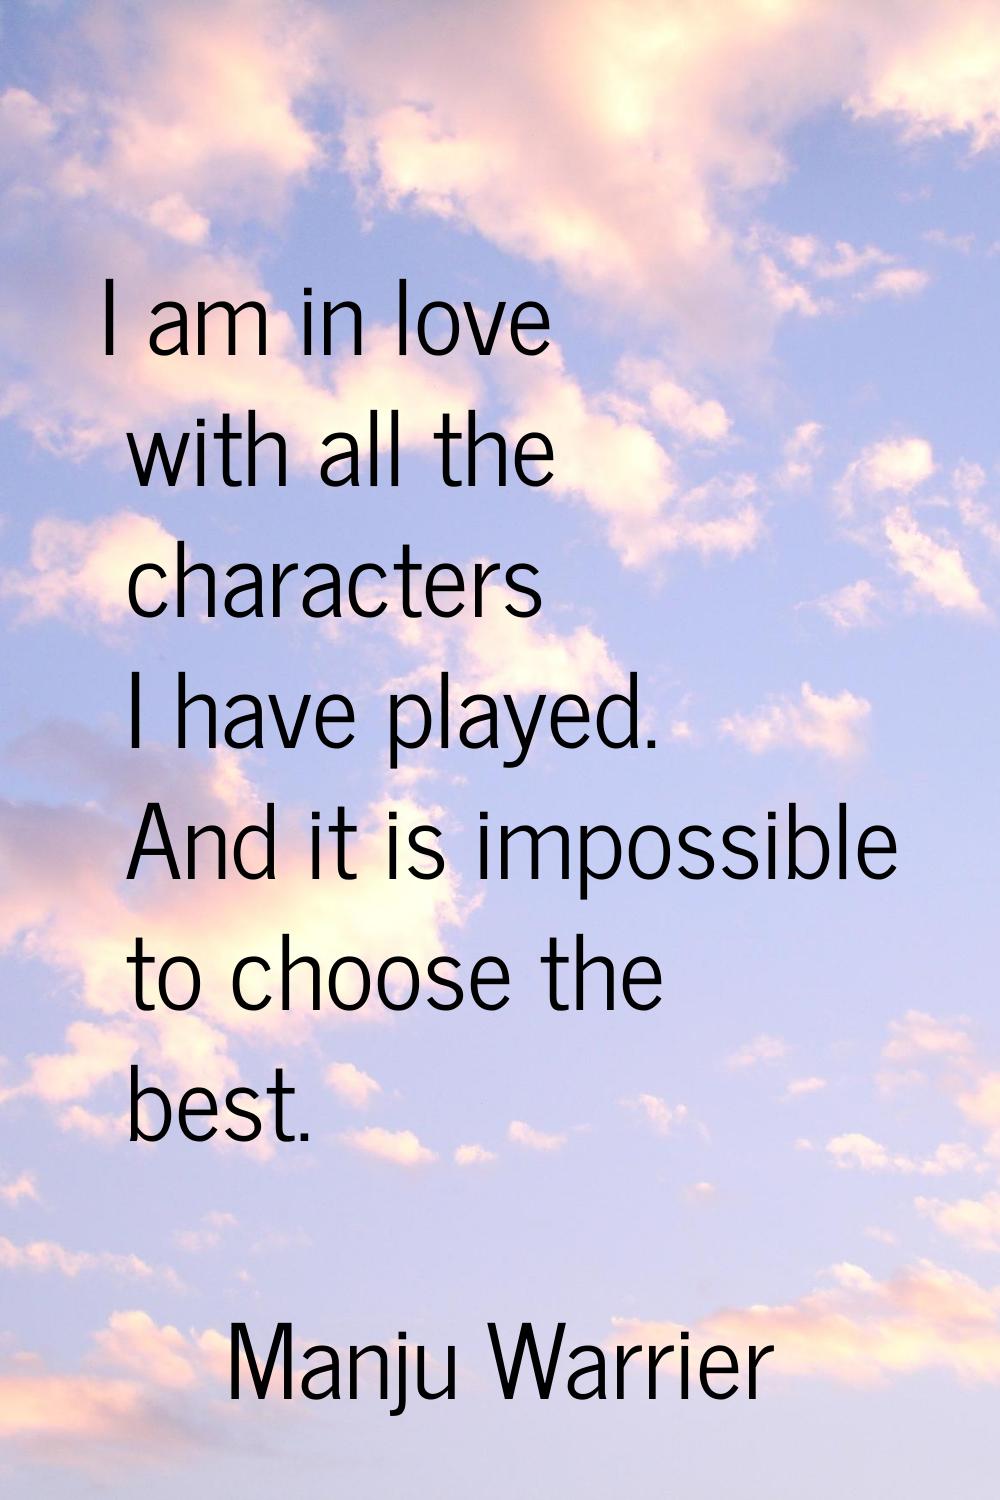 I am in love with all the characters I have played. And it is impossible to choose the best.